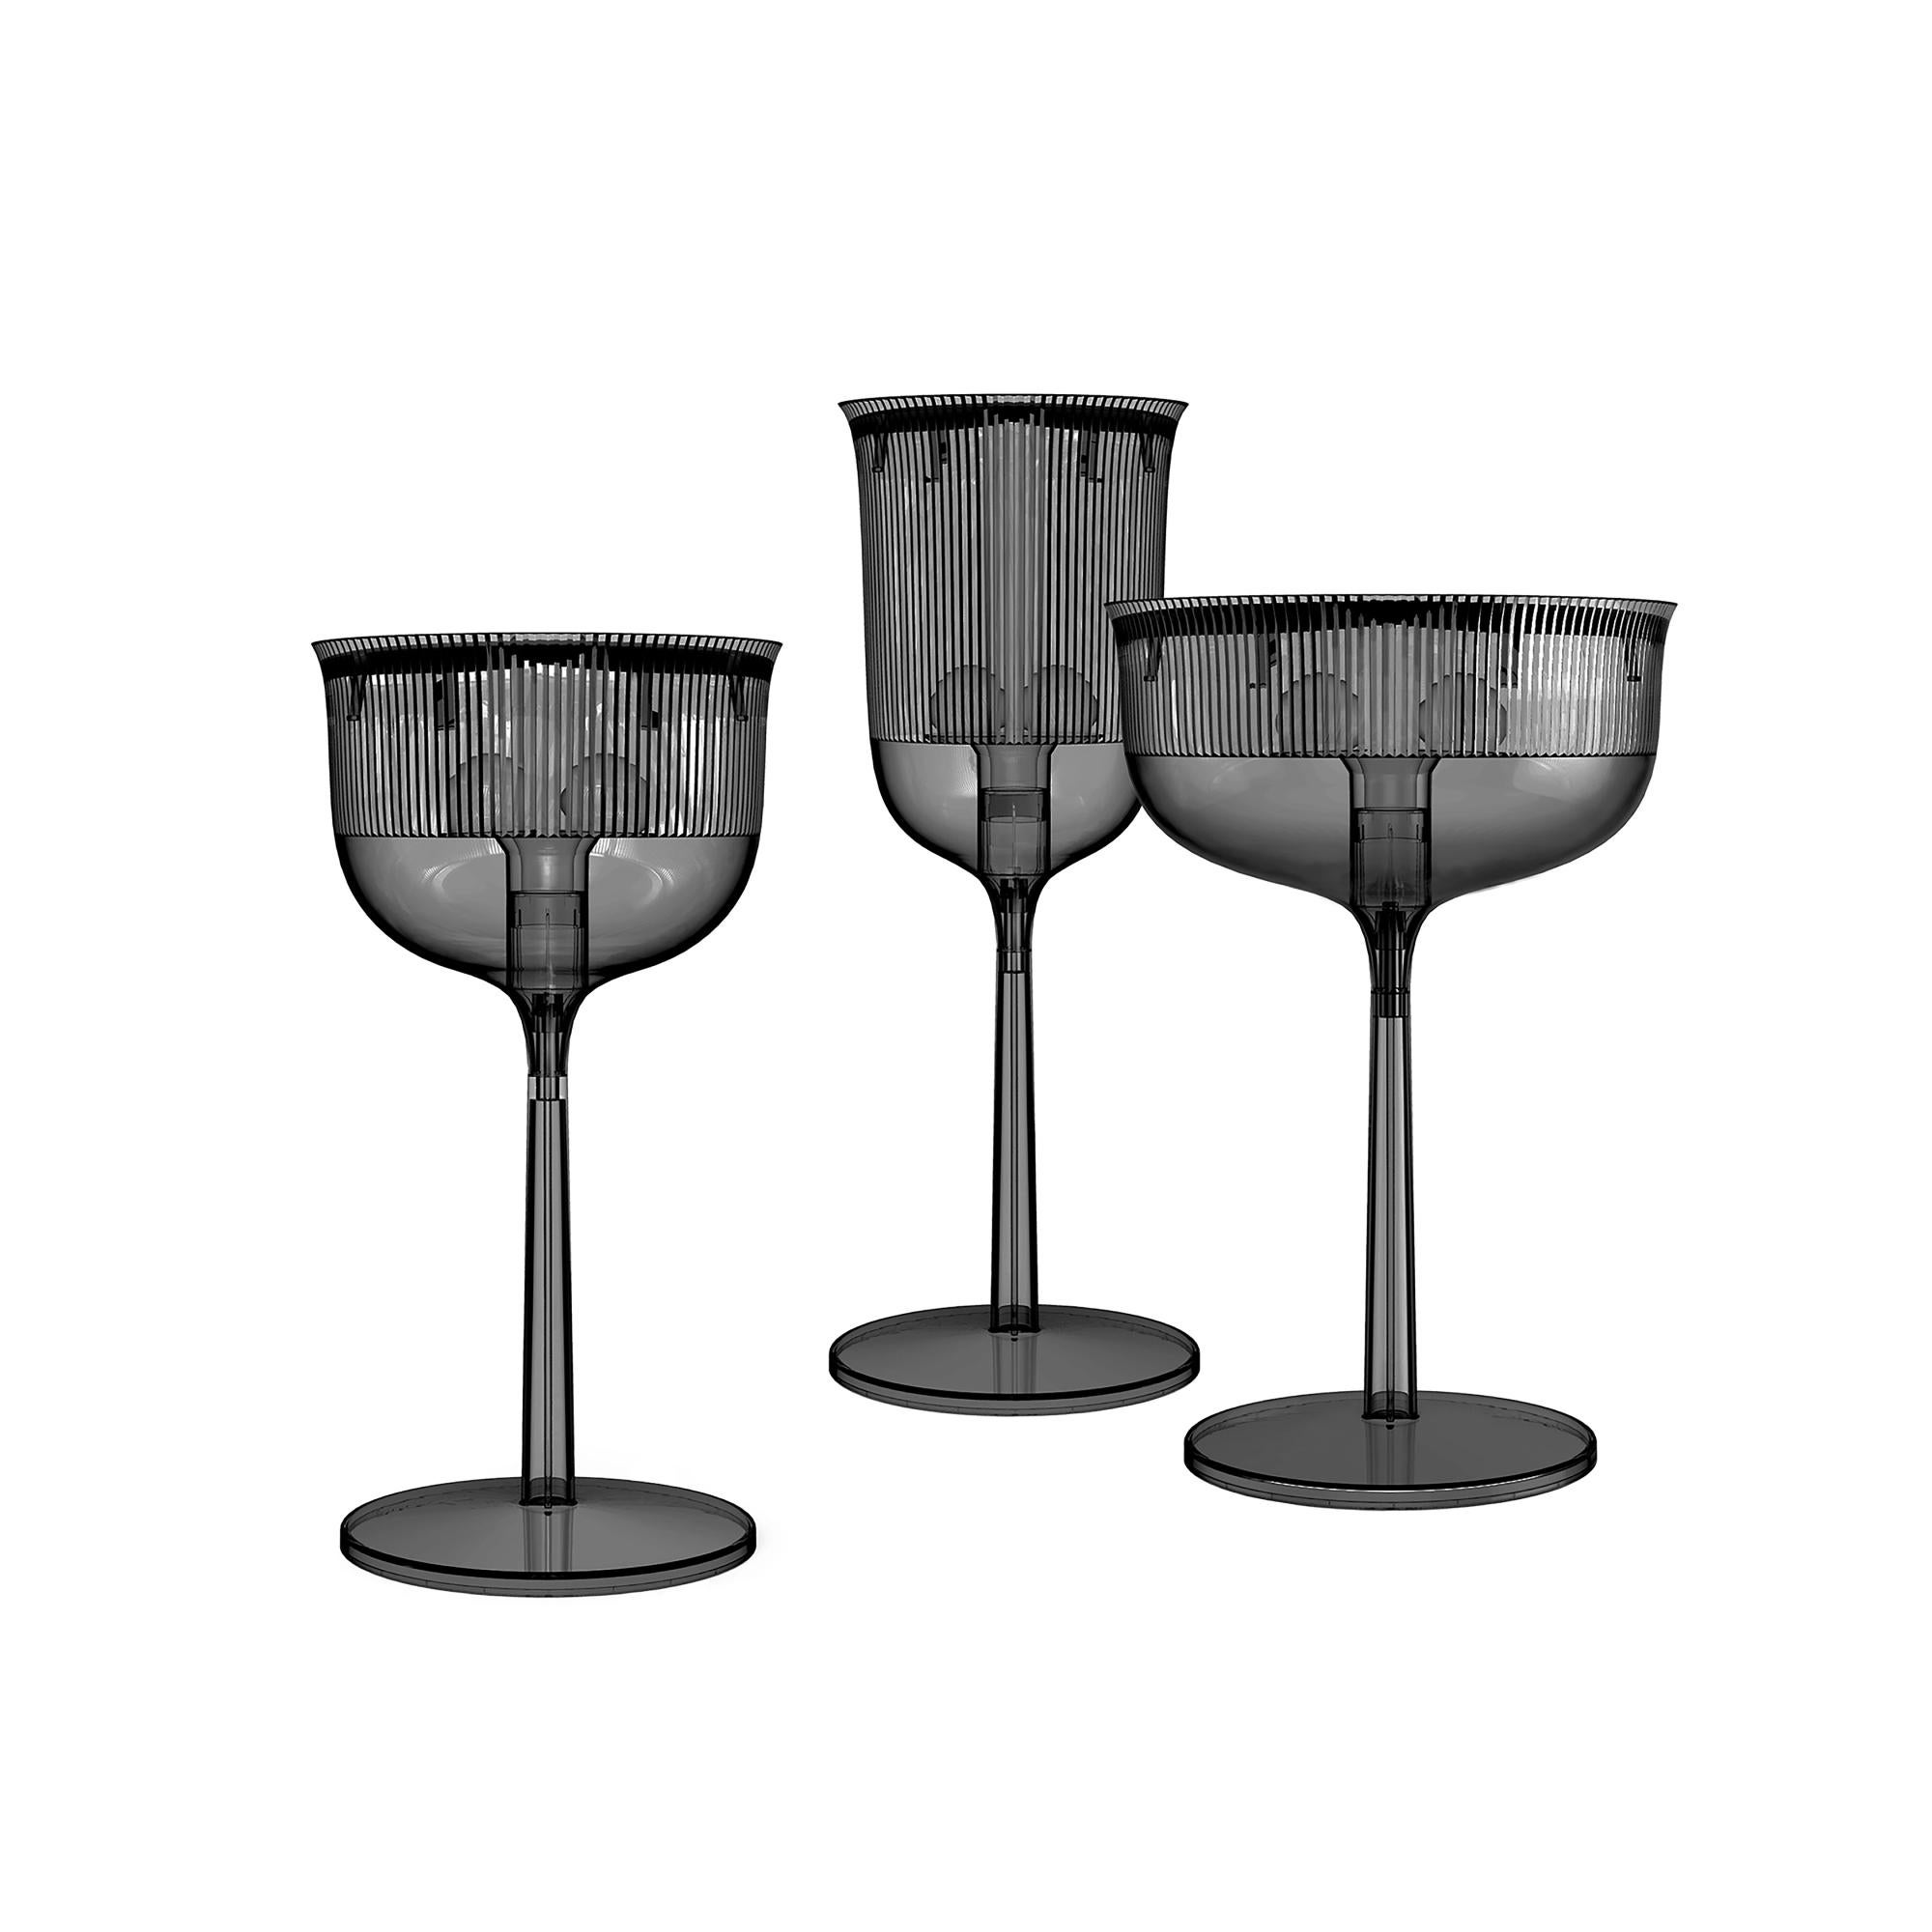 Goblets are the perfect cheers for your everyday space. The classic crystal glass, taken out from its original scale, acquires a new functionality, becoming a fine table lamp in three different shapes looking like a champagne flute, a goblet and a